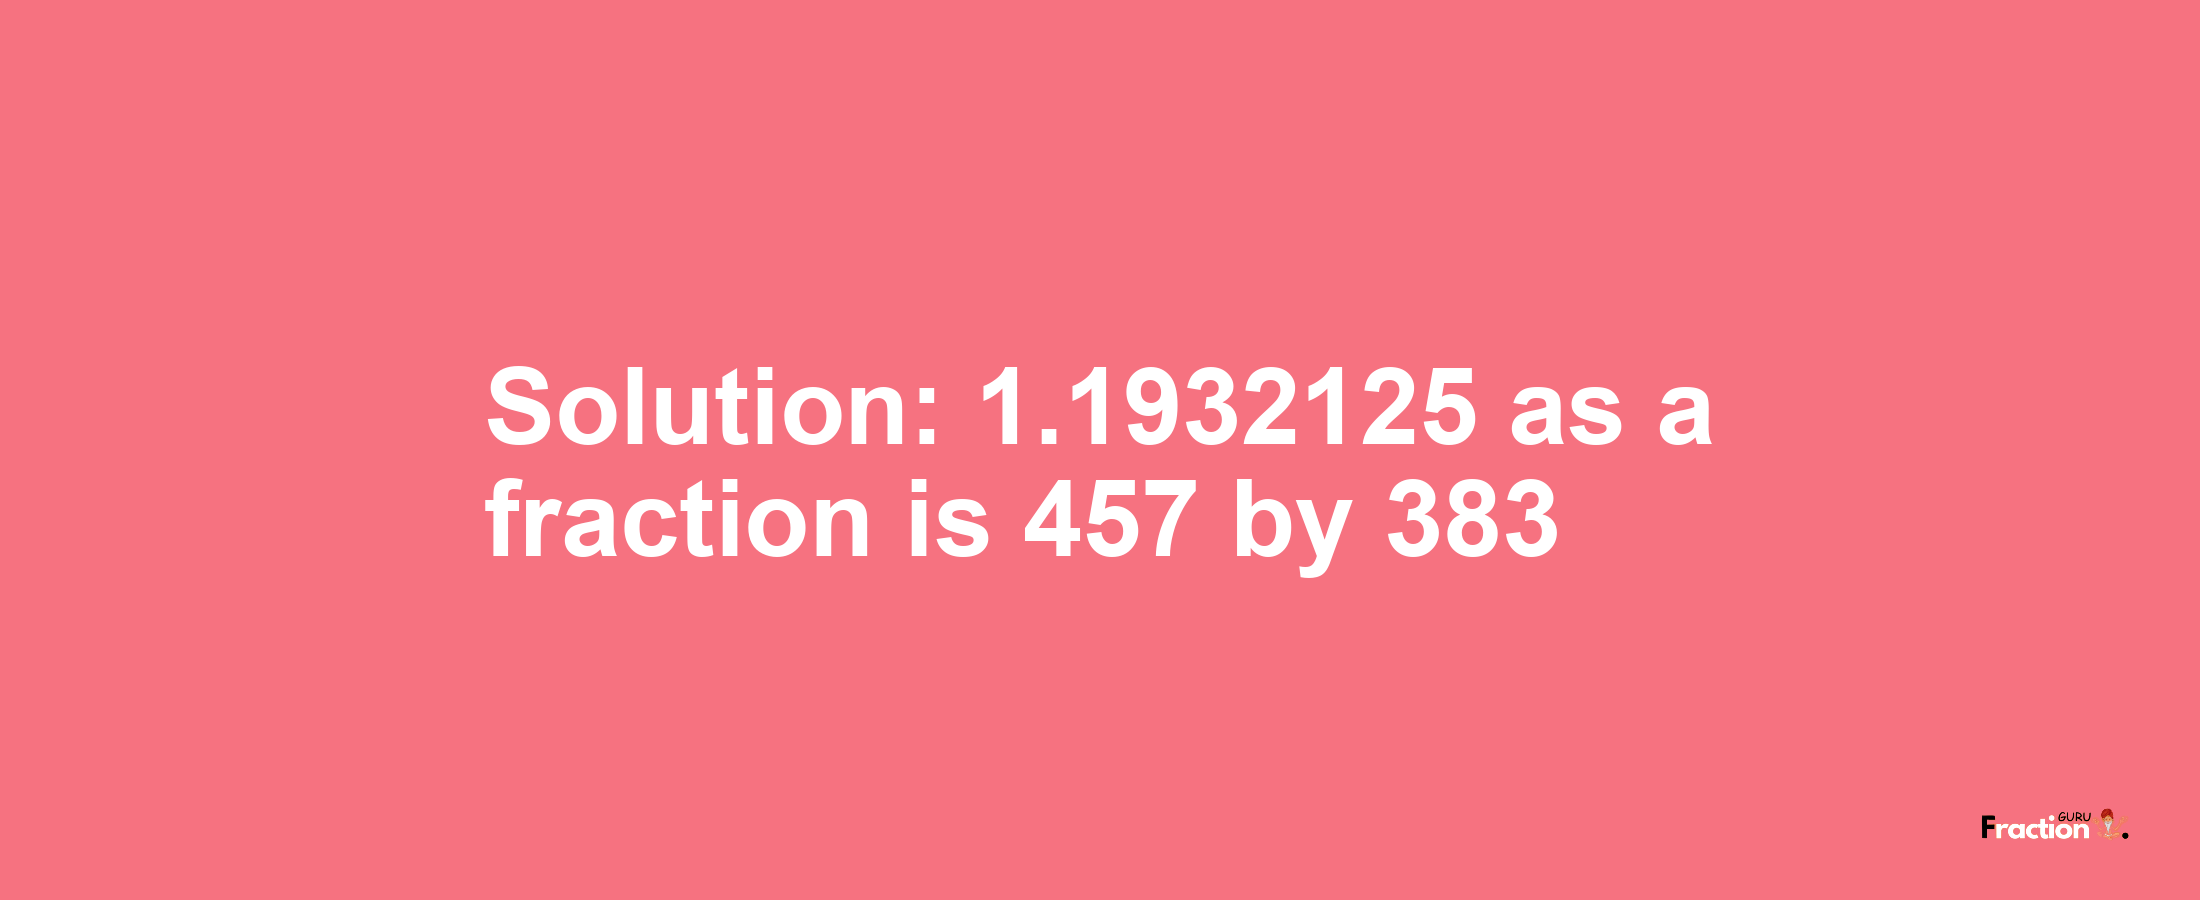 Solution:1.1932125 as a fraction is 457/383